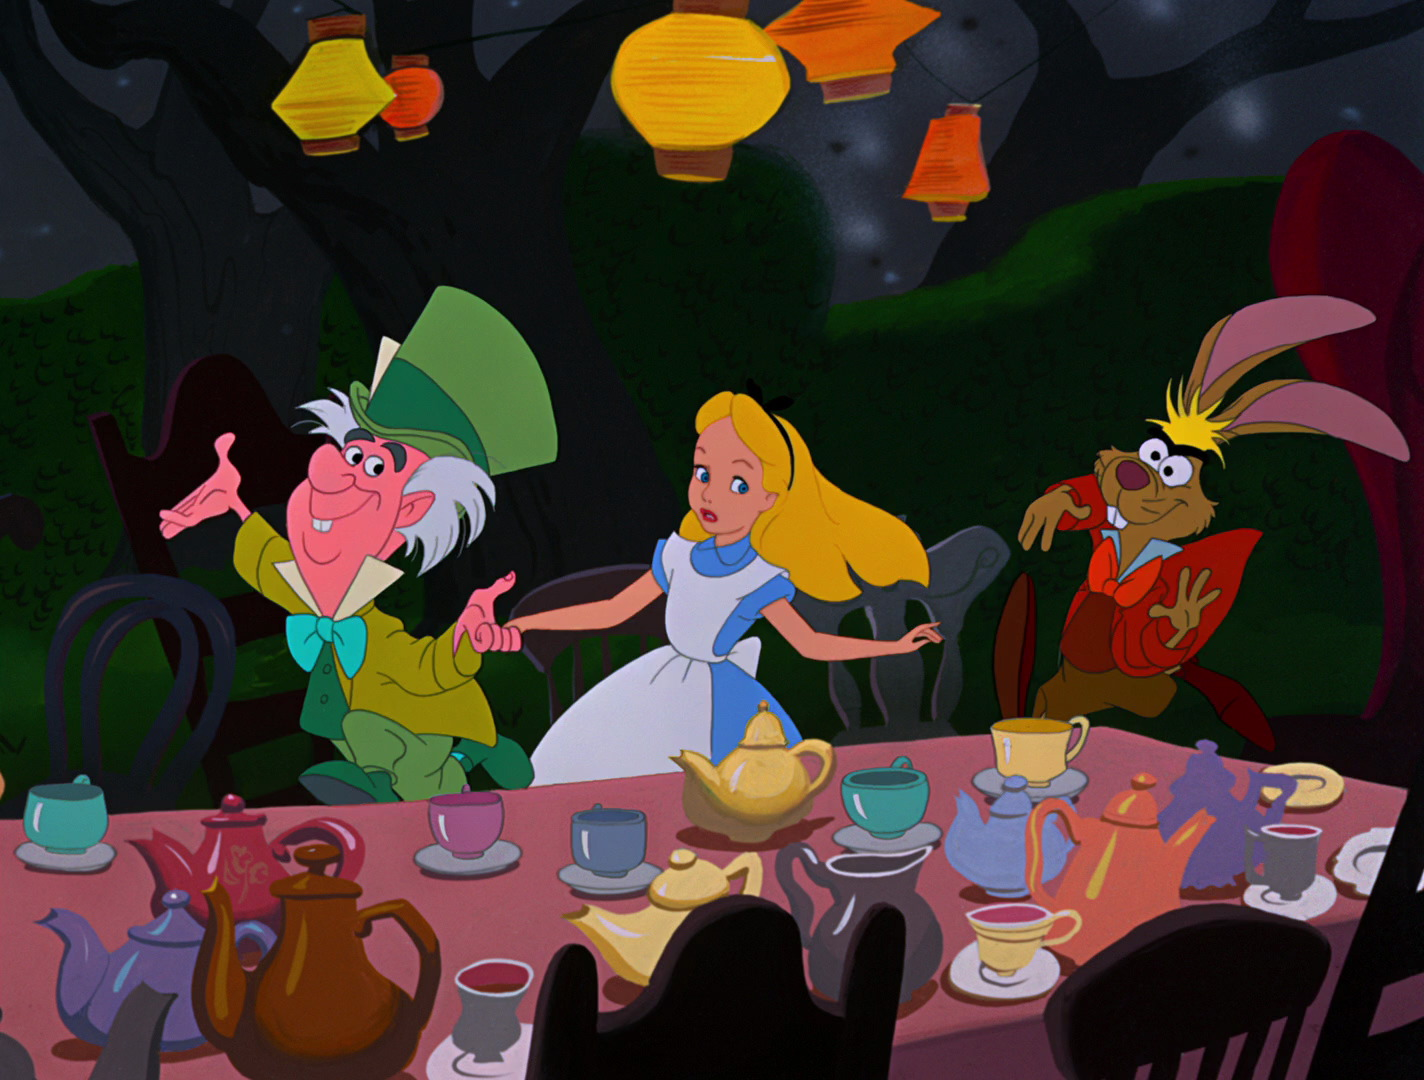 Finding The Wrong Words:  FOR WALT DISNEY'S ANIMATED FIFTY (PART 13 - ' ALICE IN WONDERLAND' EDITION)